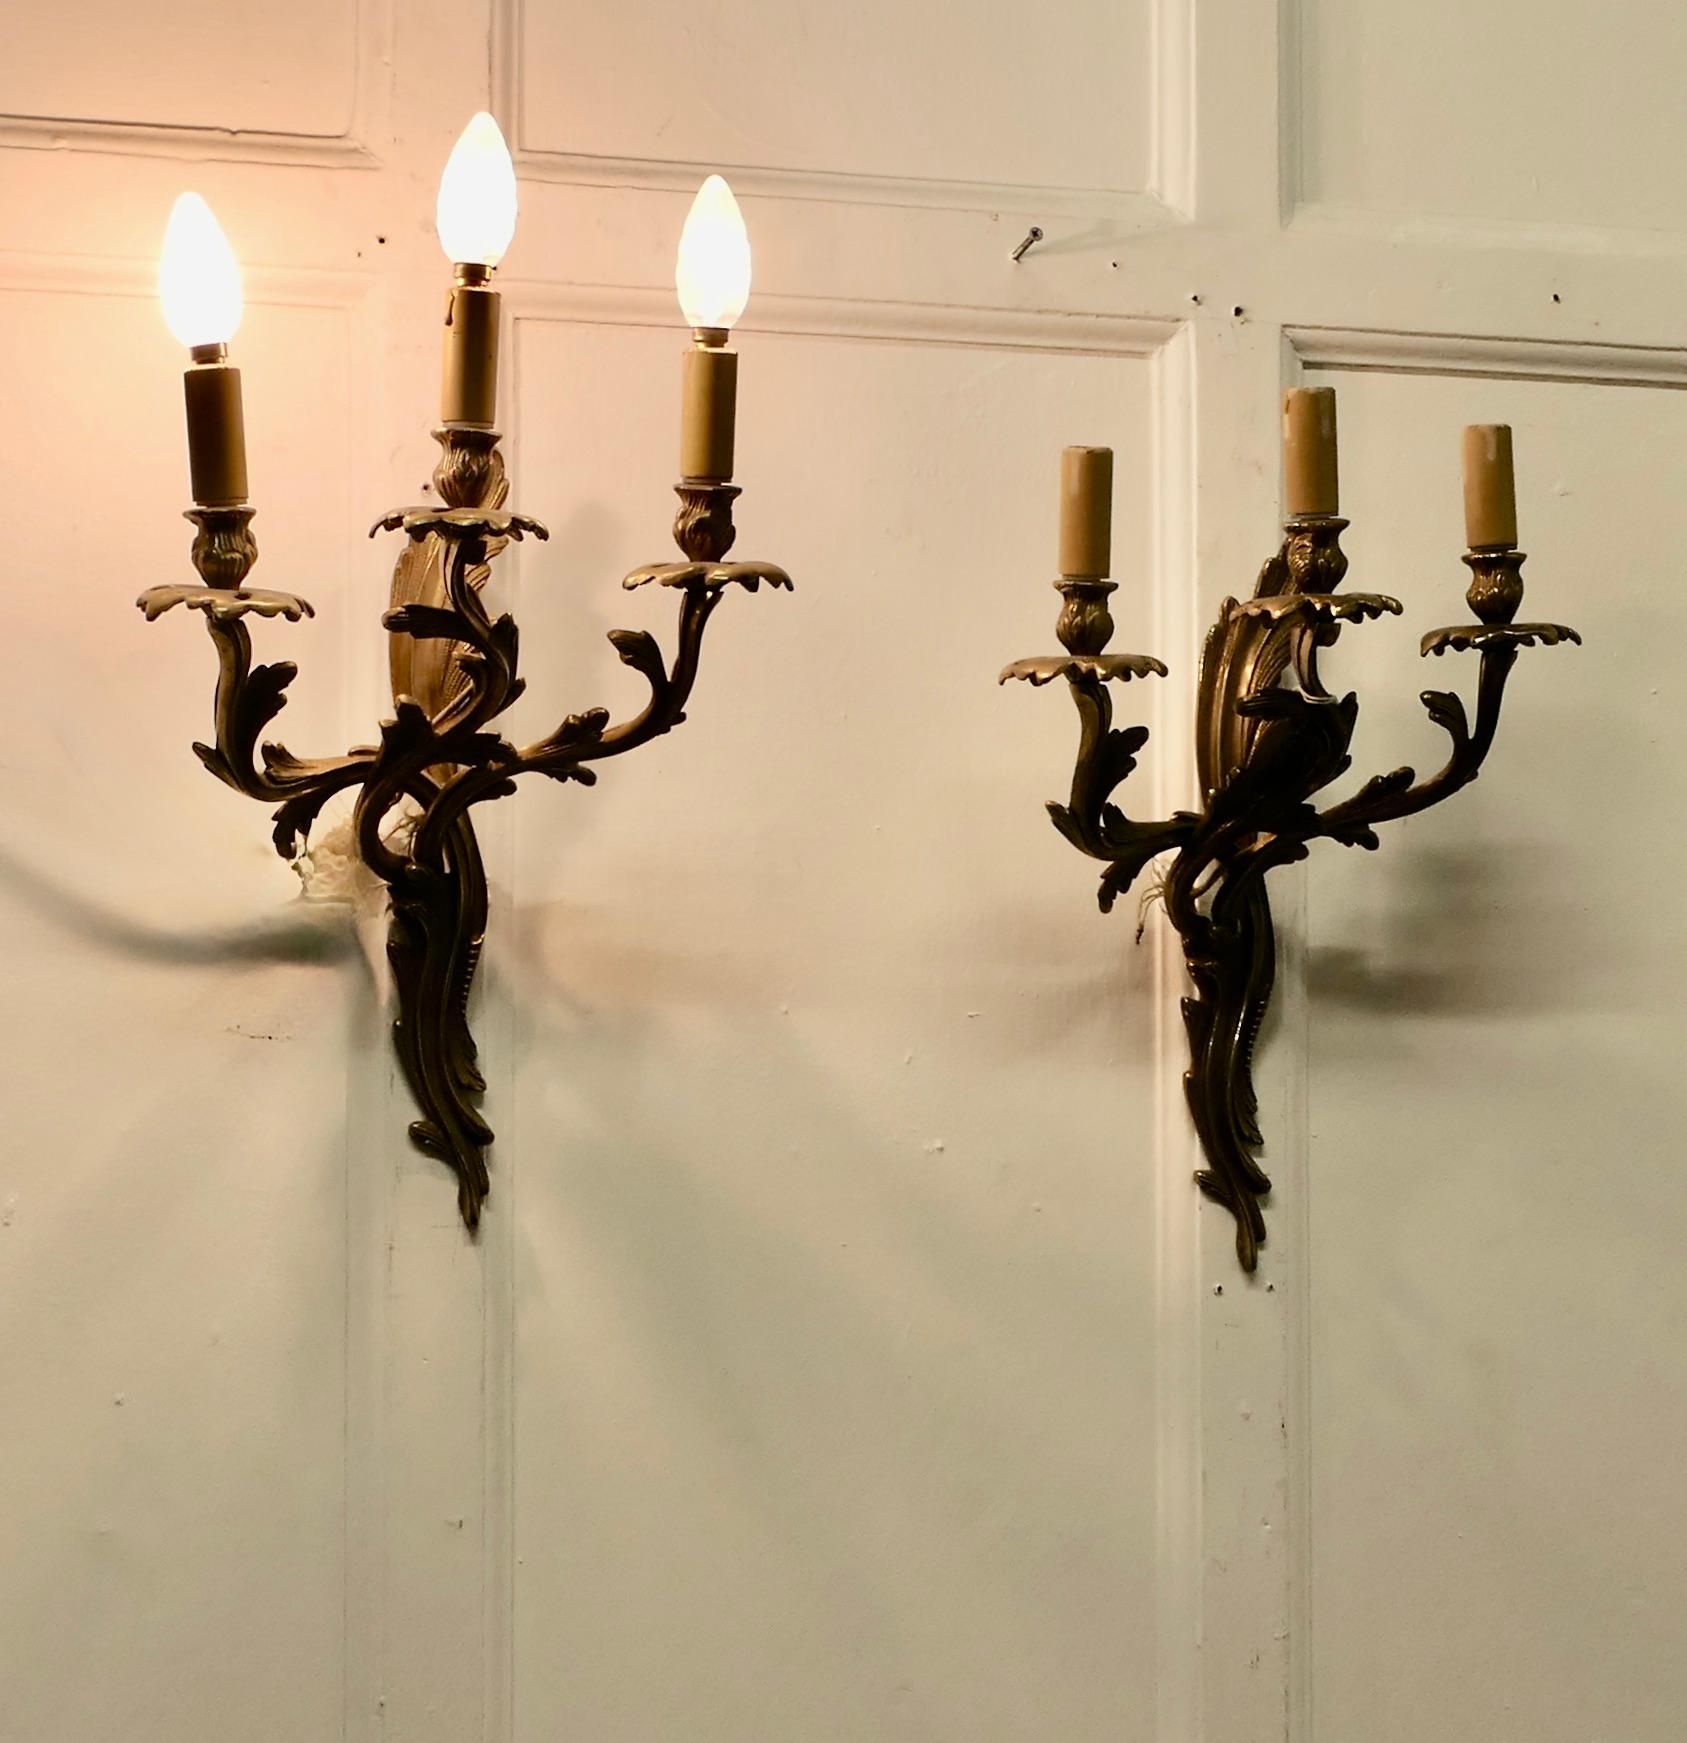 Set of 4 Large French Brass 3 Branch Wall Lights


A very handsome set of Large Heavy Brass wall lights, the lights are in the classical style of a twisted acanthus leaf scroll branches  
Each light has 3 branches each with a sconce and candle